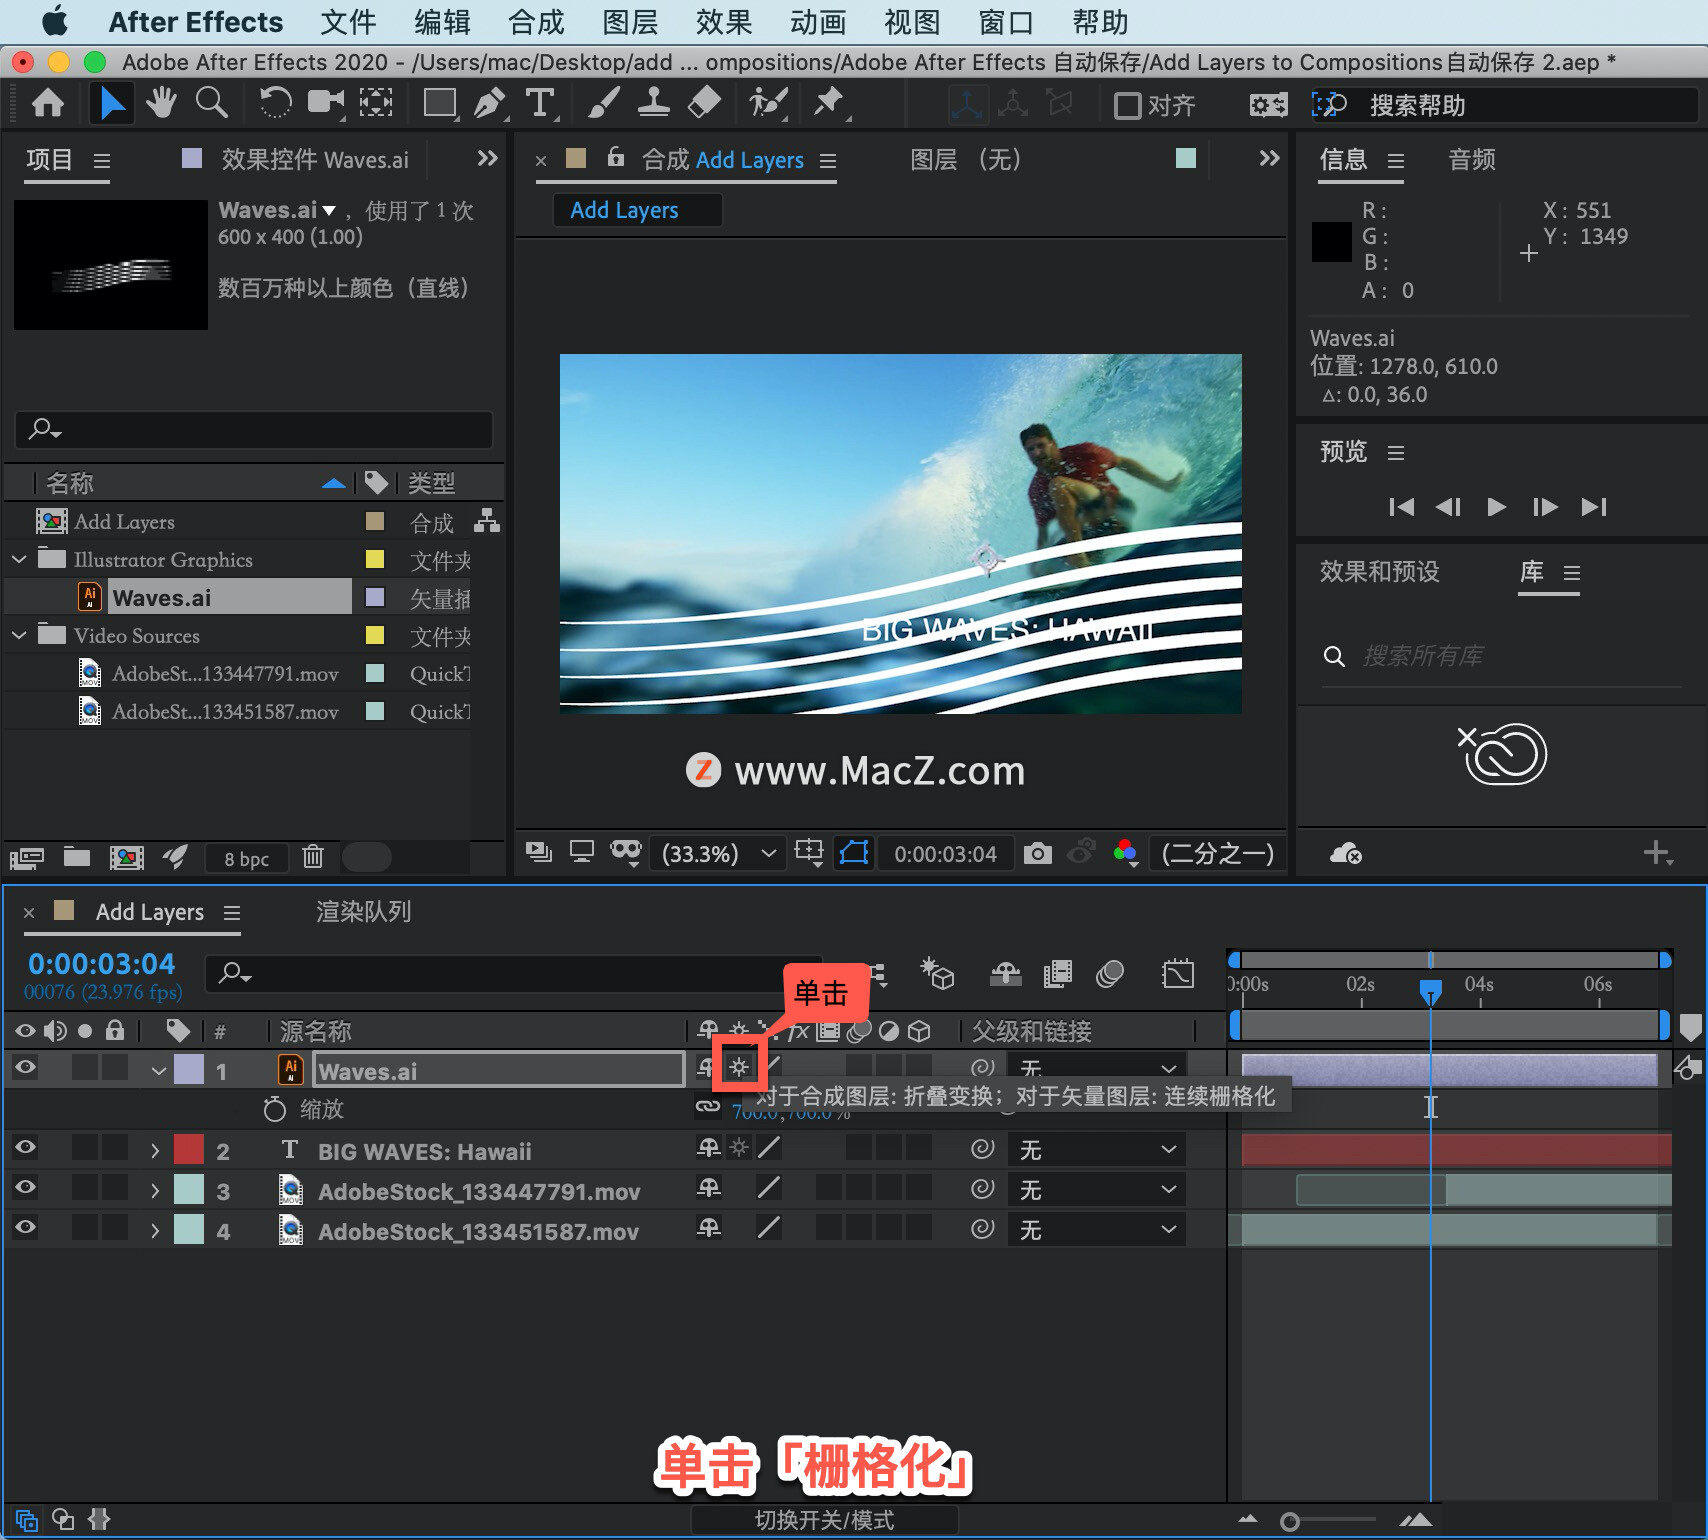 After Effects 教程「64」，如何在 After Effects 中栅格化、扭曲图层？